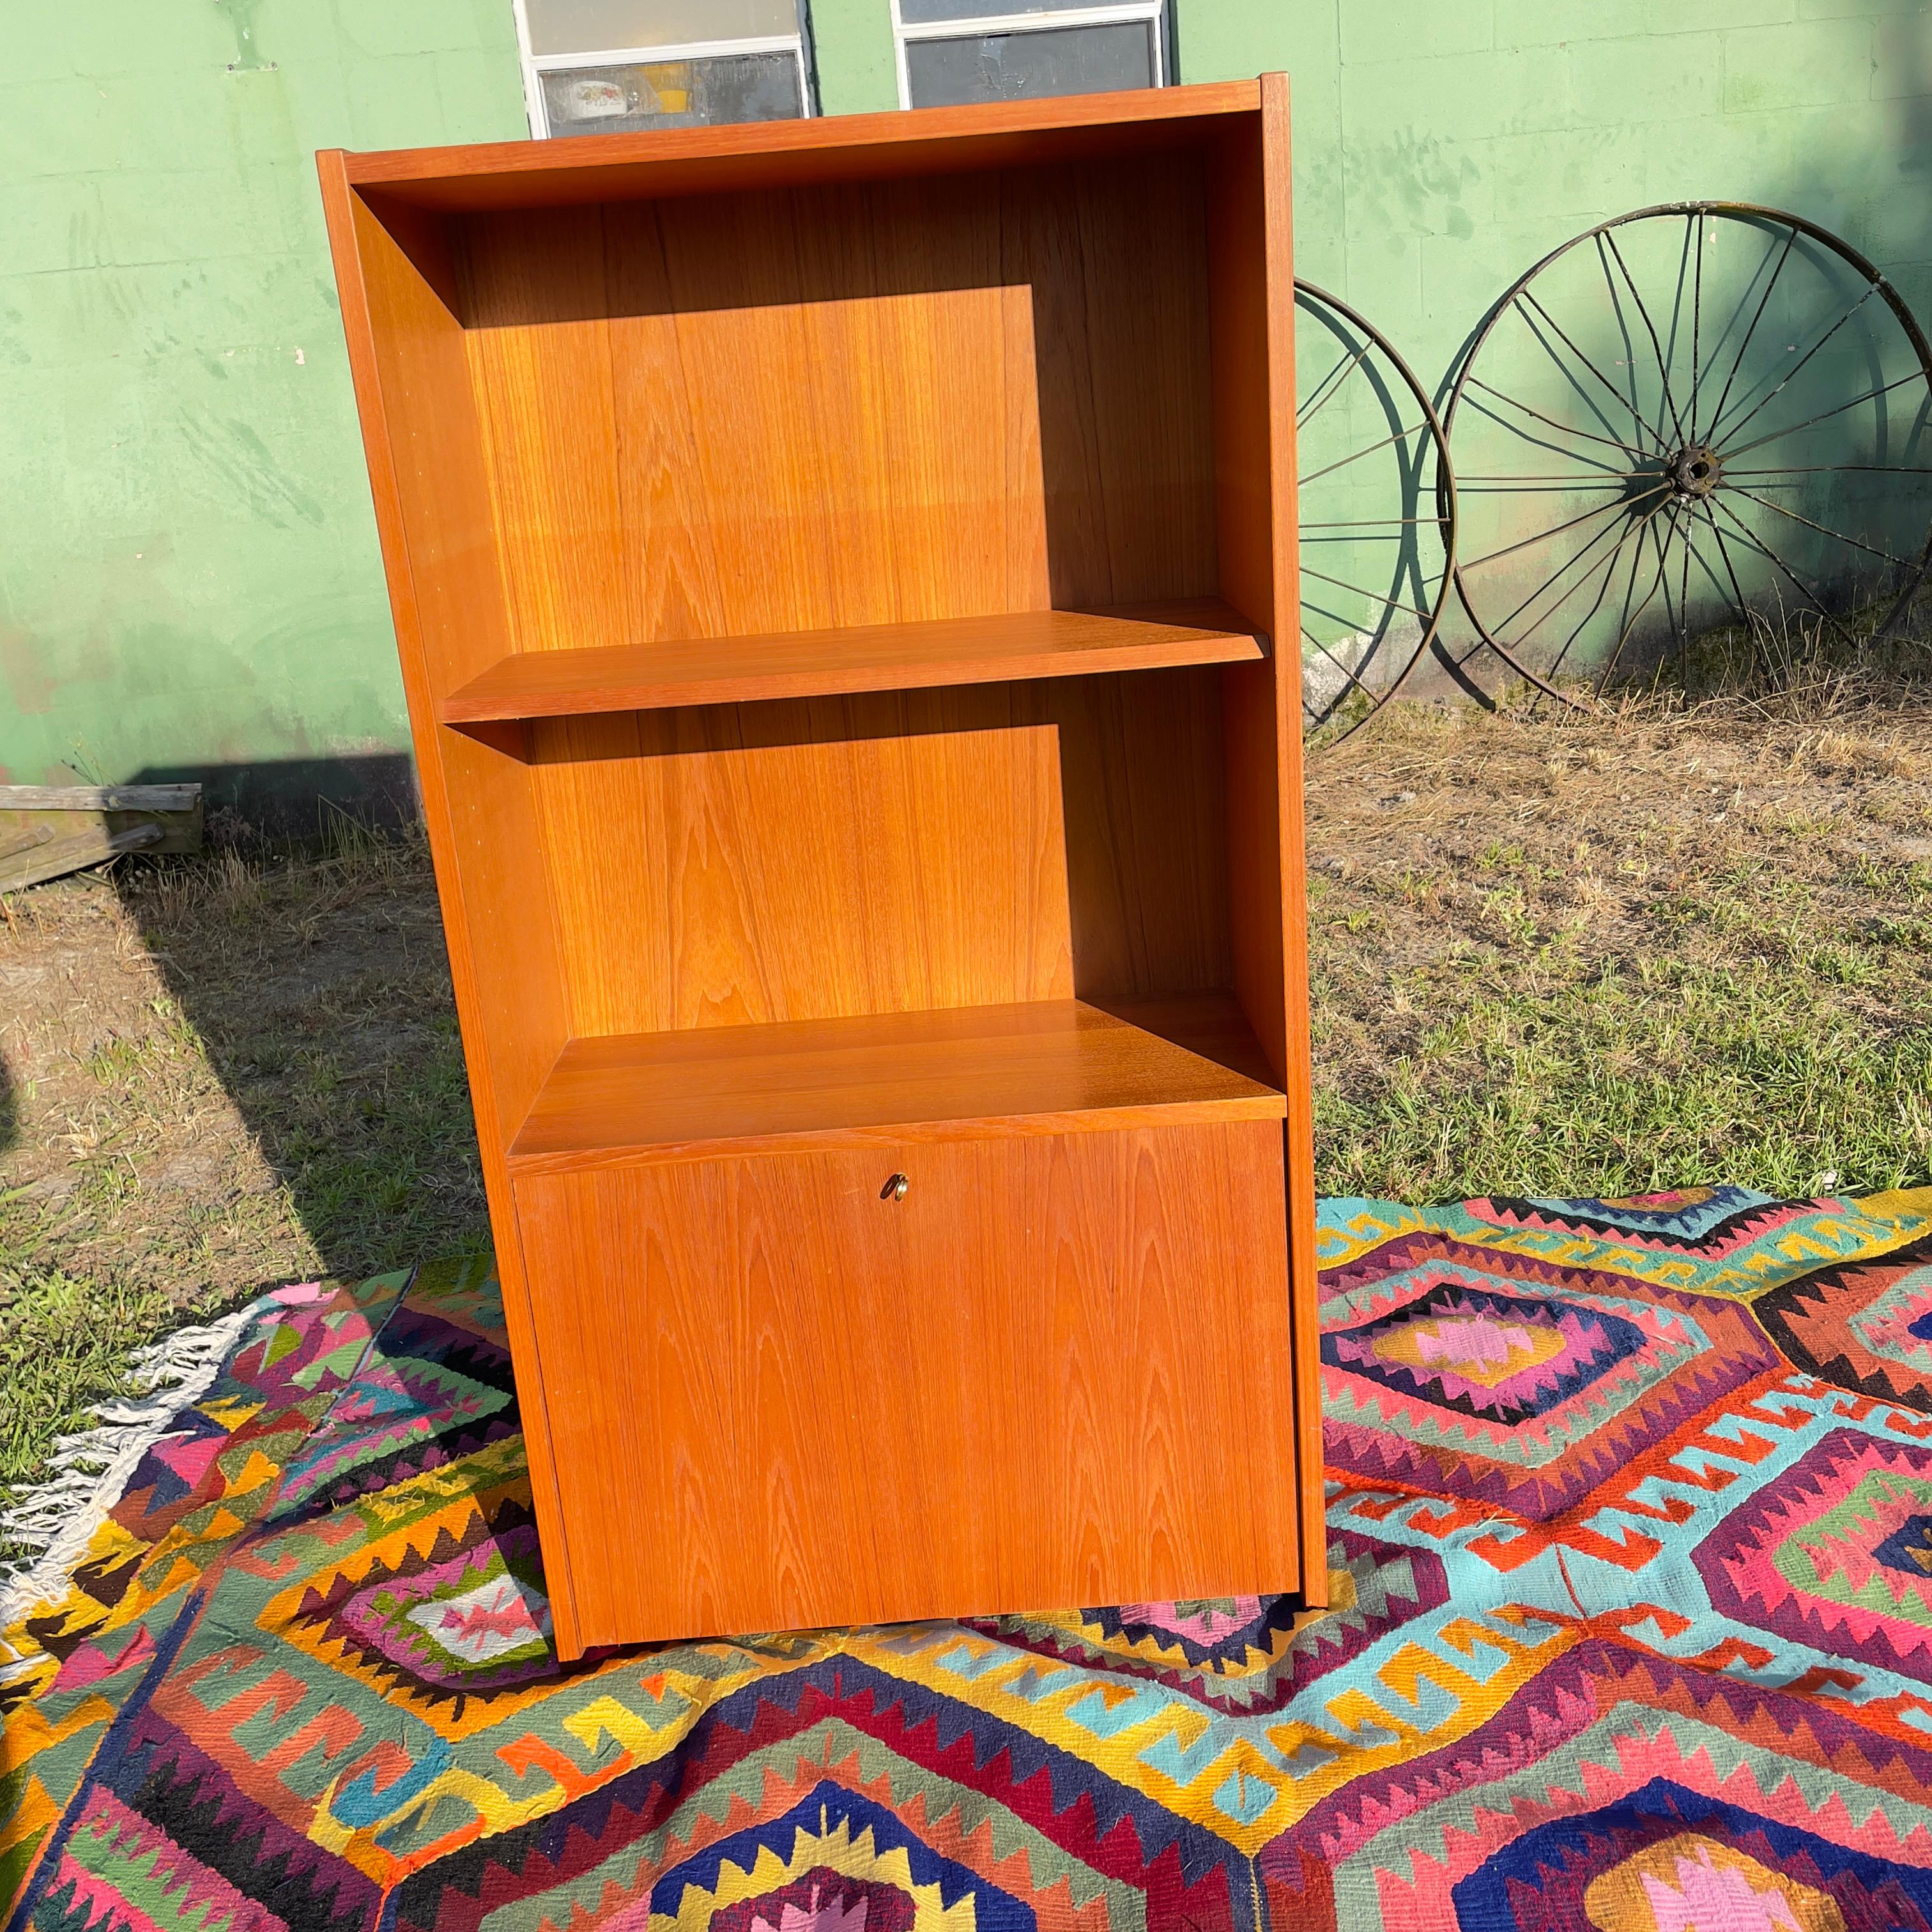 This listing is for the top portion only of a two piece set. There is no base. The base is a very ordinary teak cabinet, in the shape of a cube. Out of the two pieces, this piece is by far the cooler of the two. This desk/cabinet combo can also